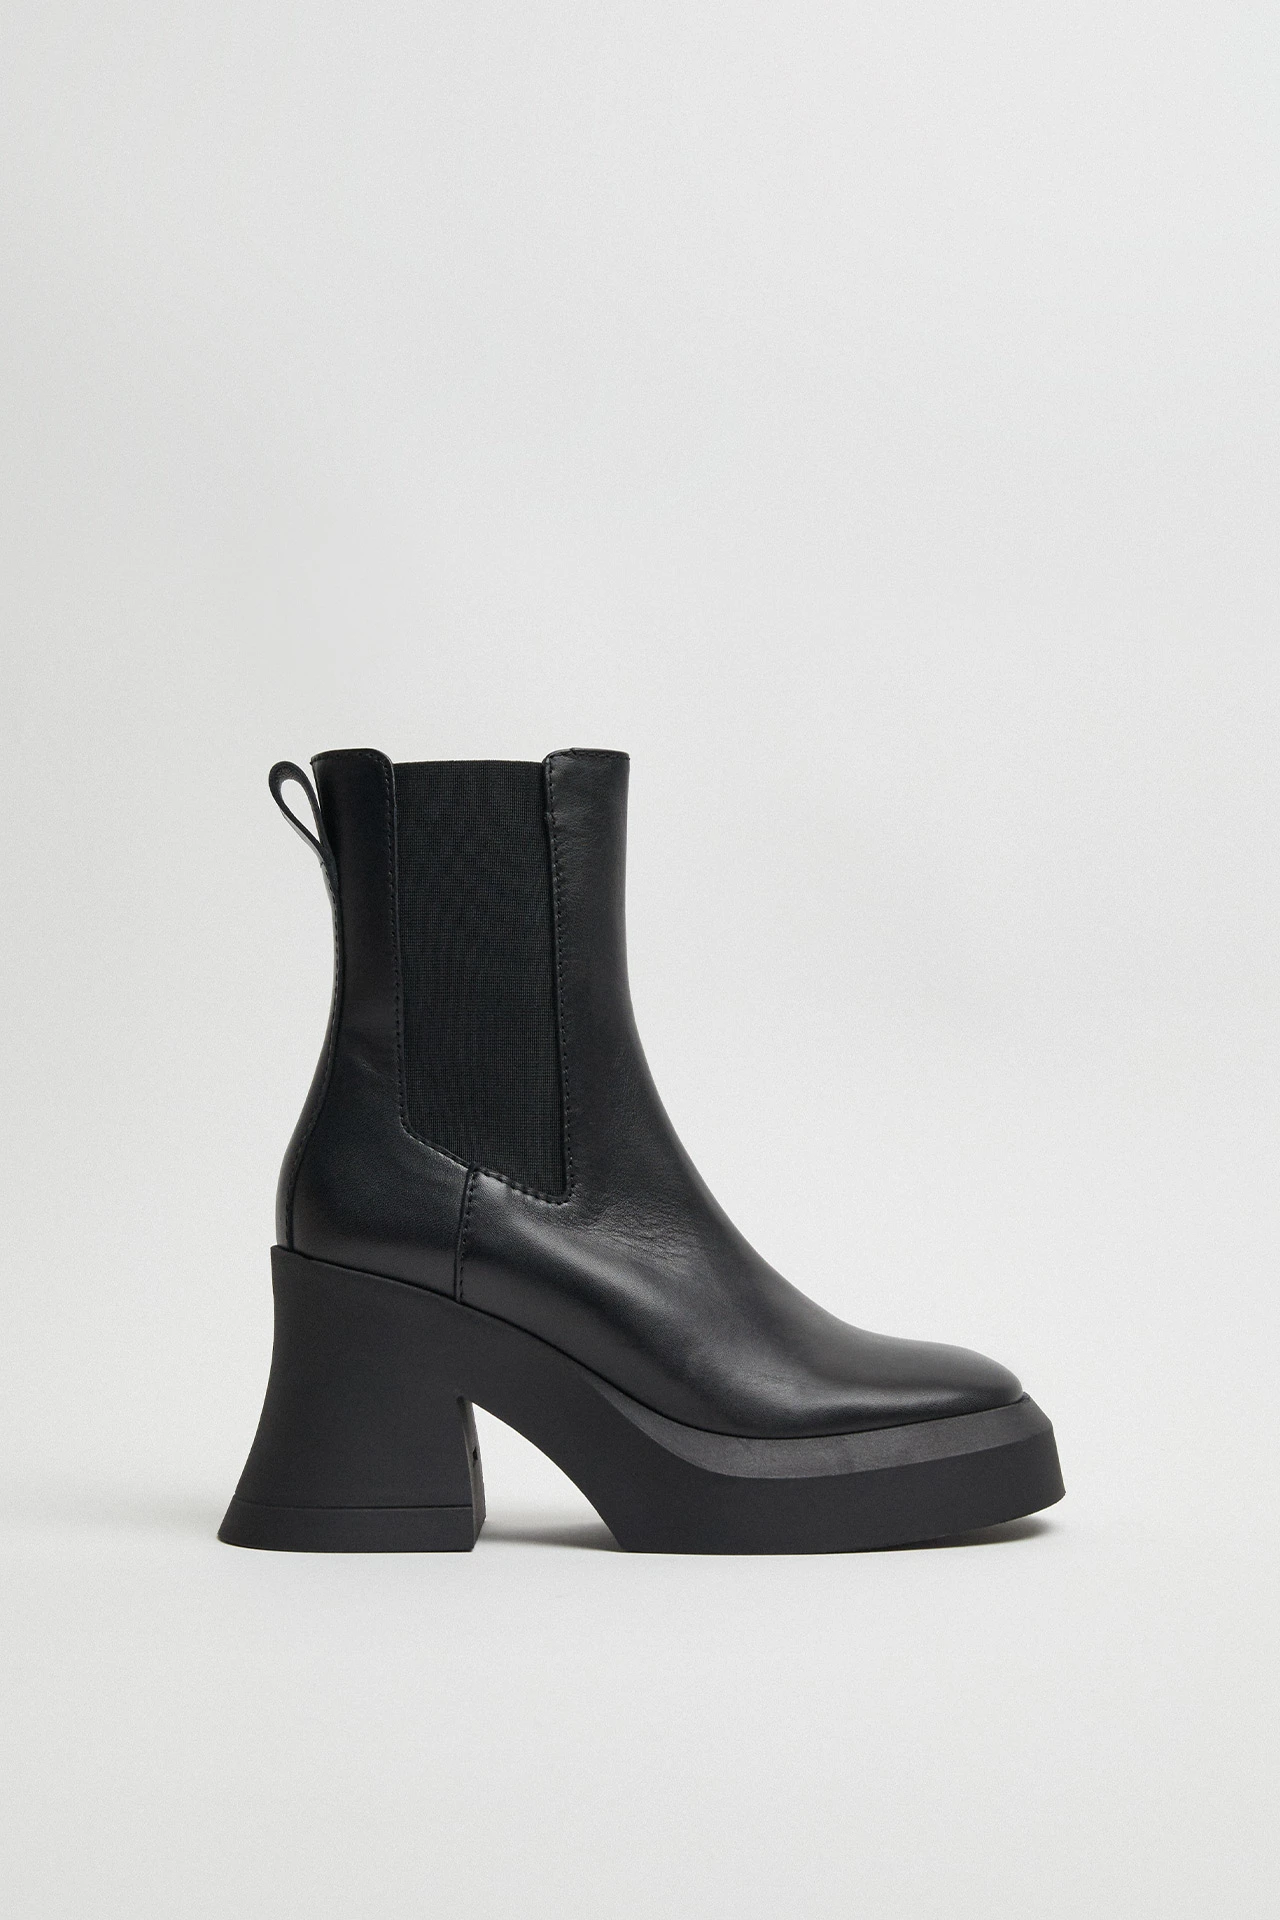 E8-analu-black-ankle-boots-01